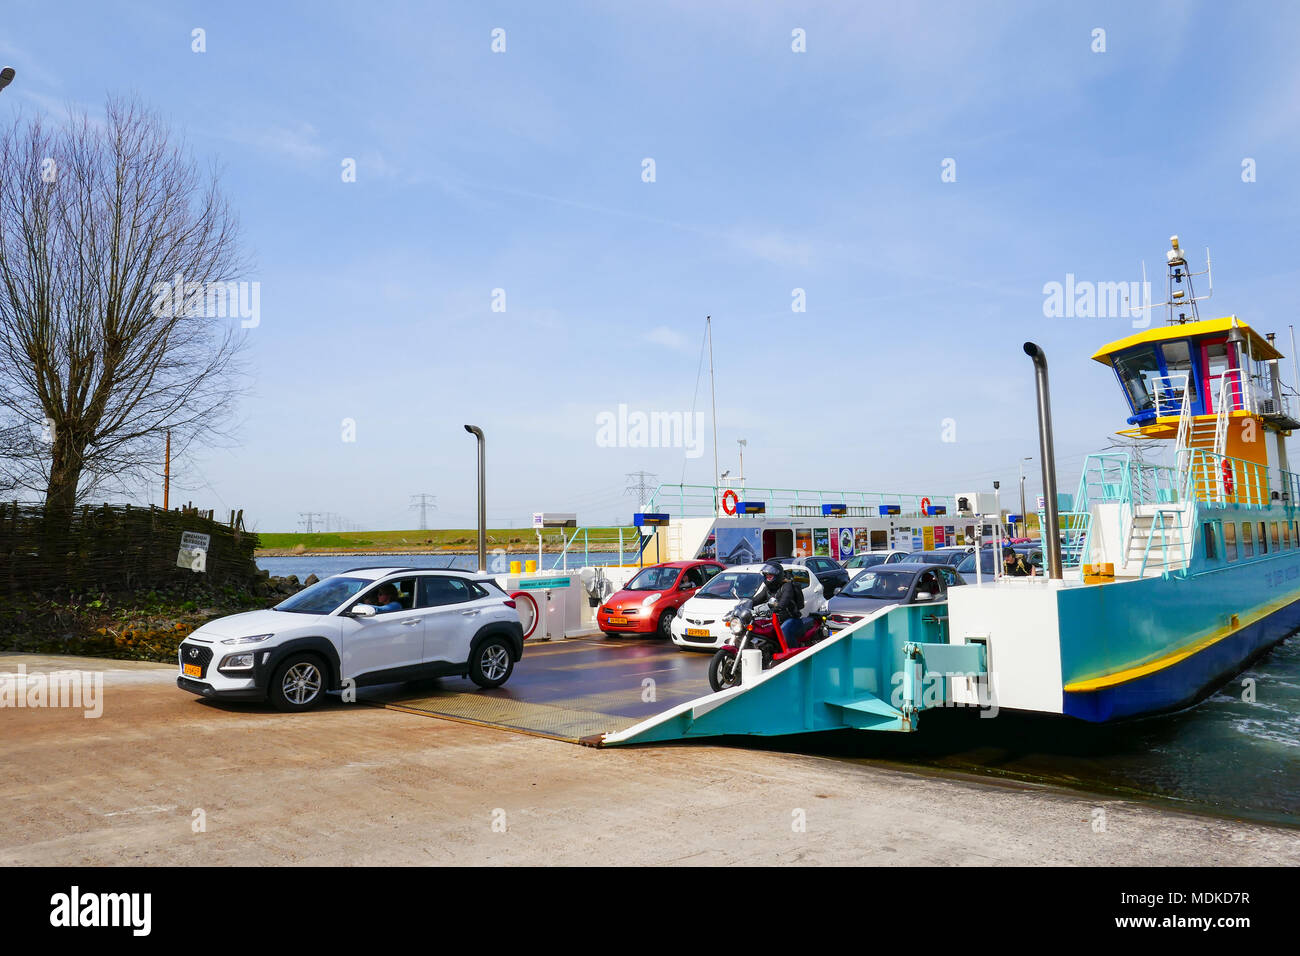 ferry with cars at Spui, Voorne Putten, Netherlands Stock Photo